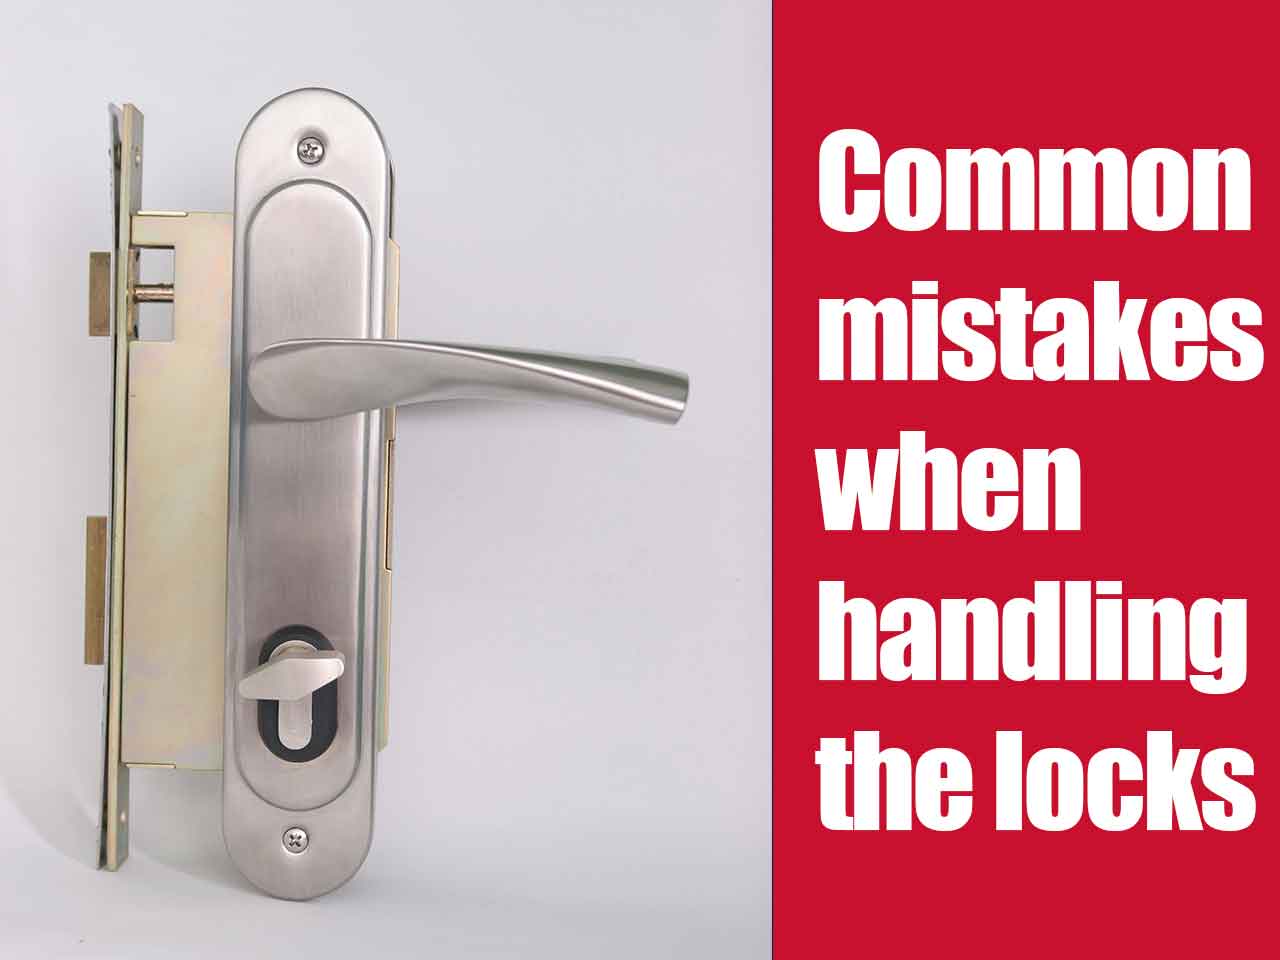 Common mistakes people make when handling their locks